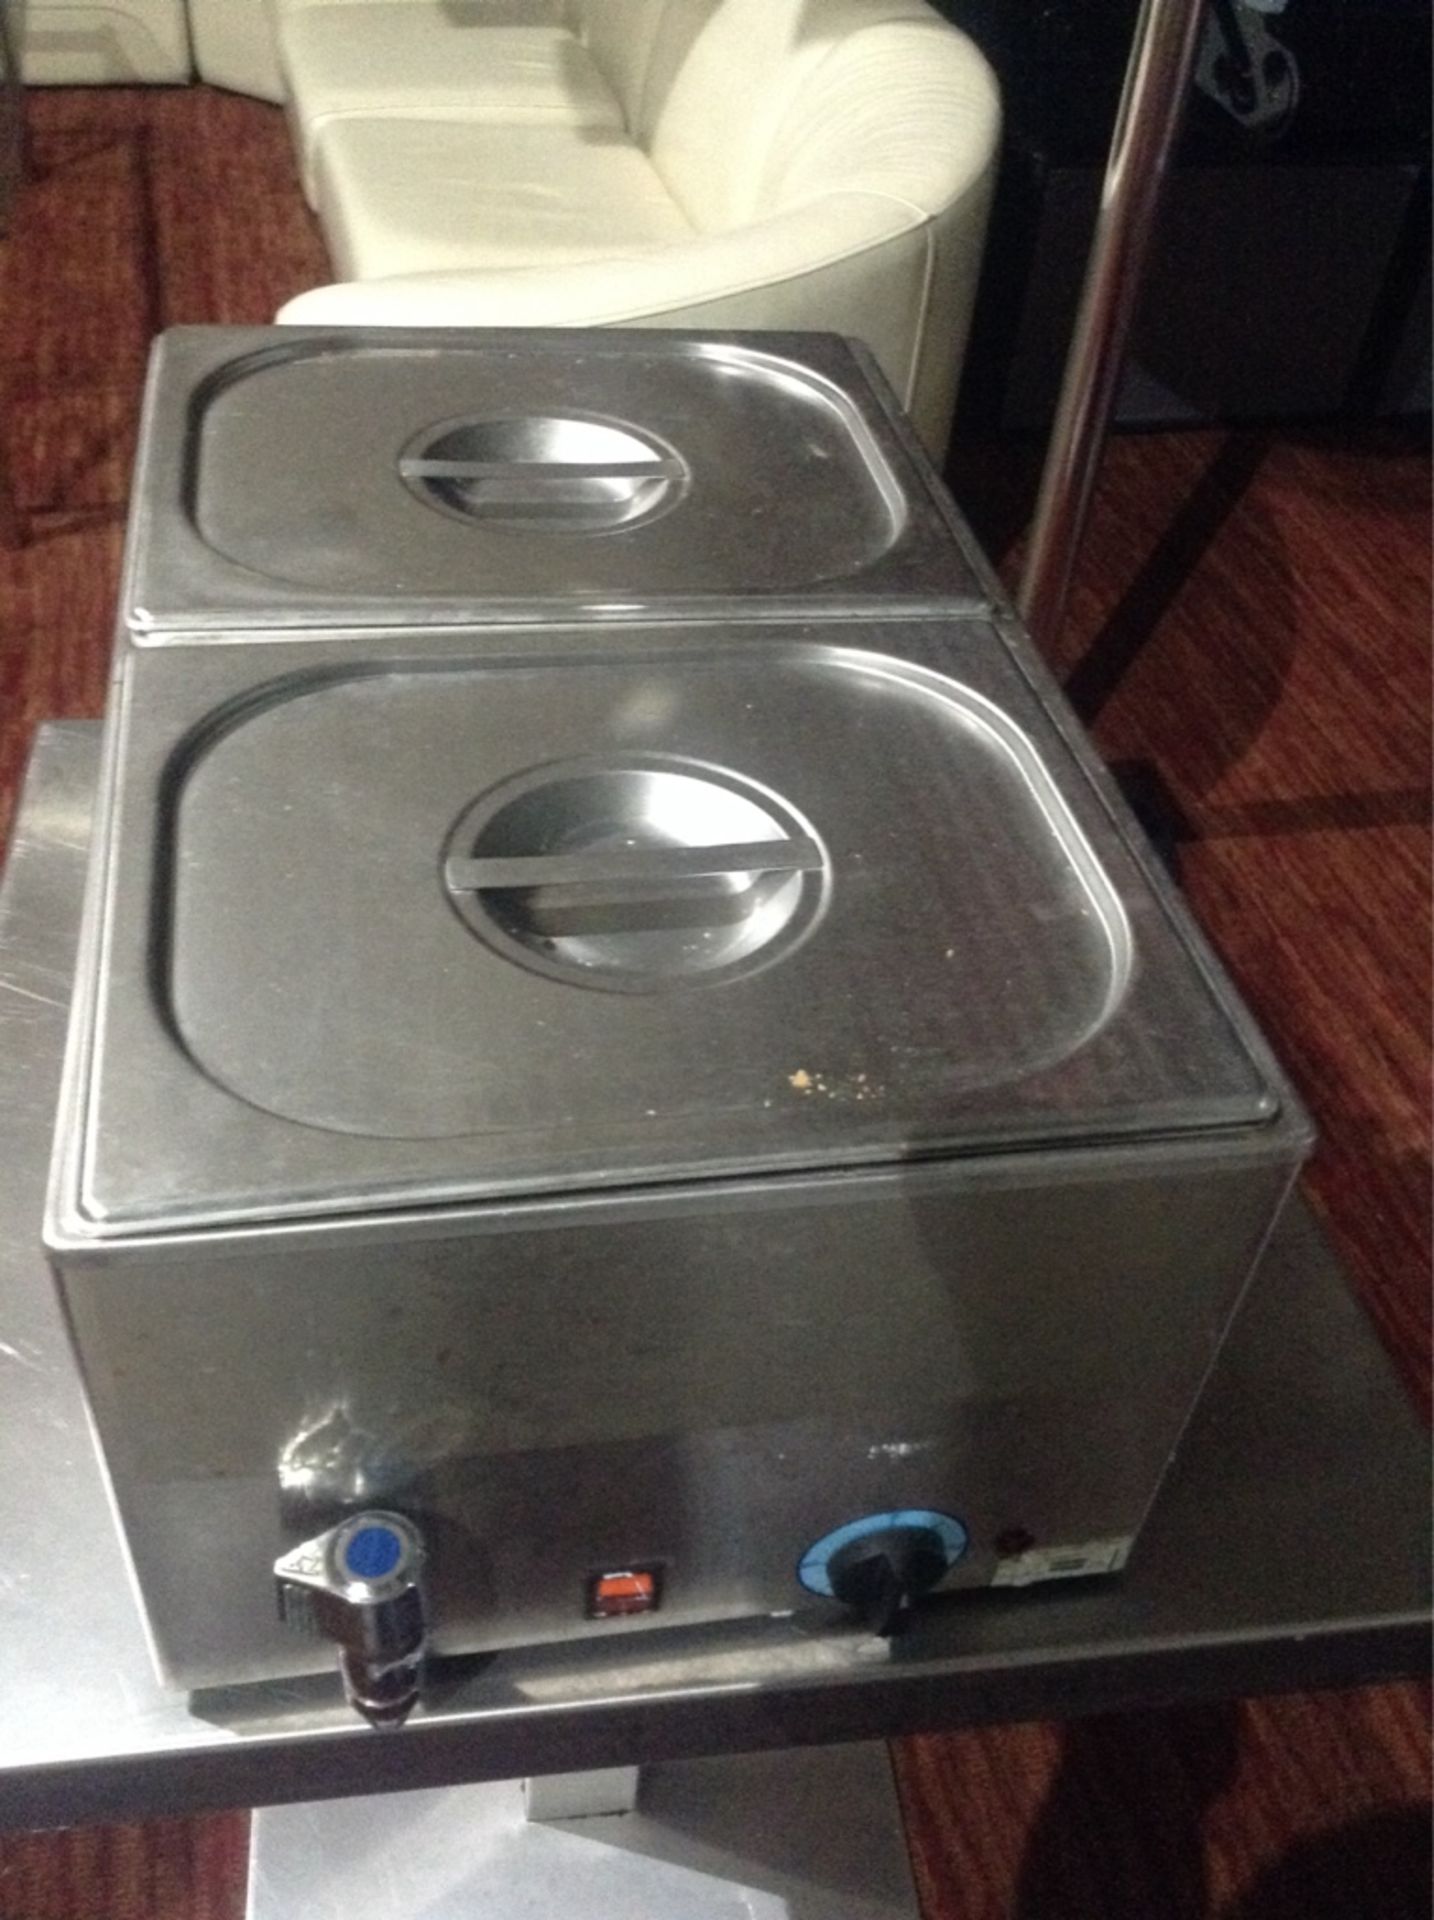 Wet Bain Marie PLEASE READ LOT 0 AS THE IMPORTANT INFORMATION DIFFERS FROM OUR USUAL AUCTIONS.